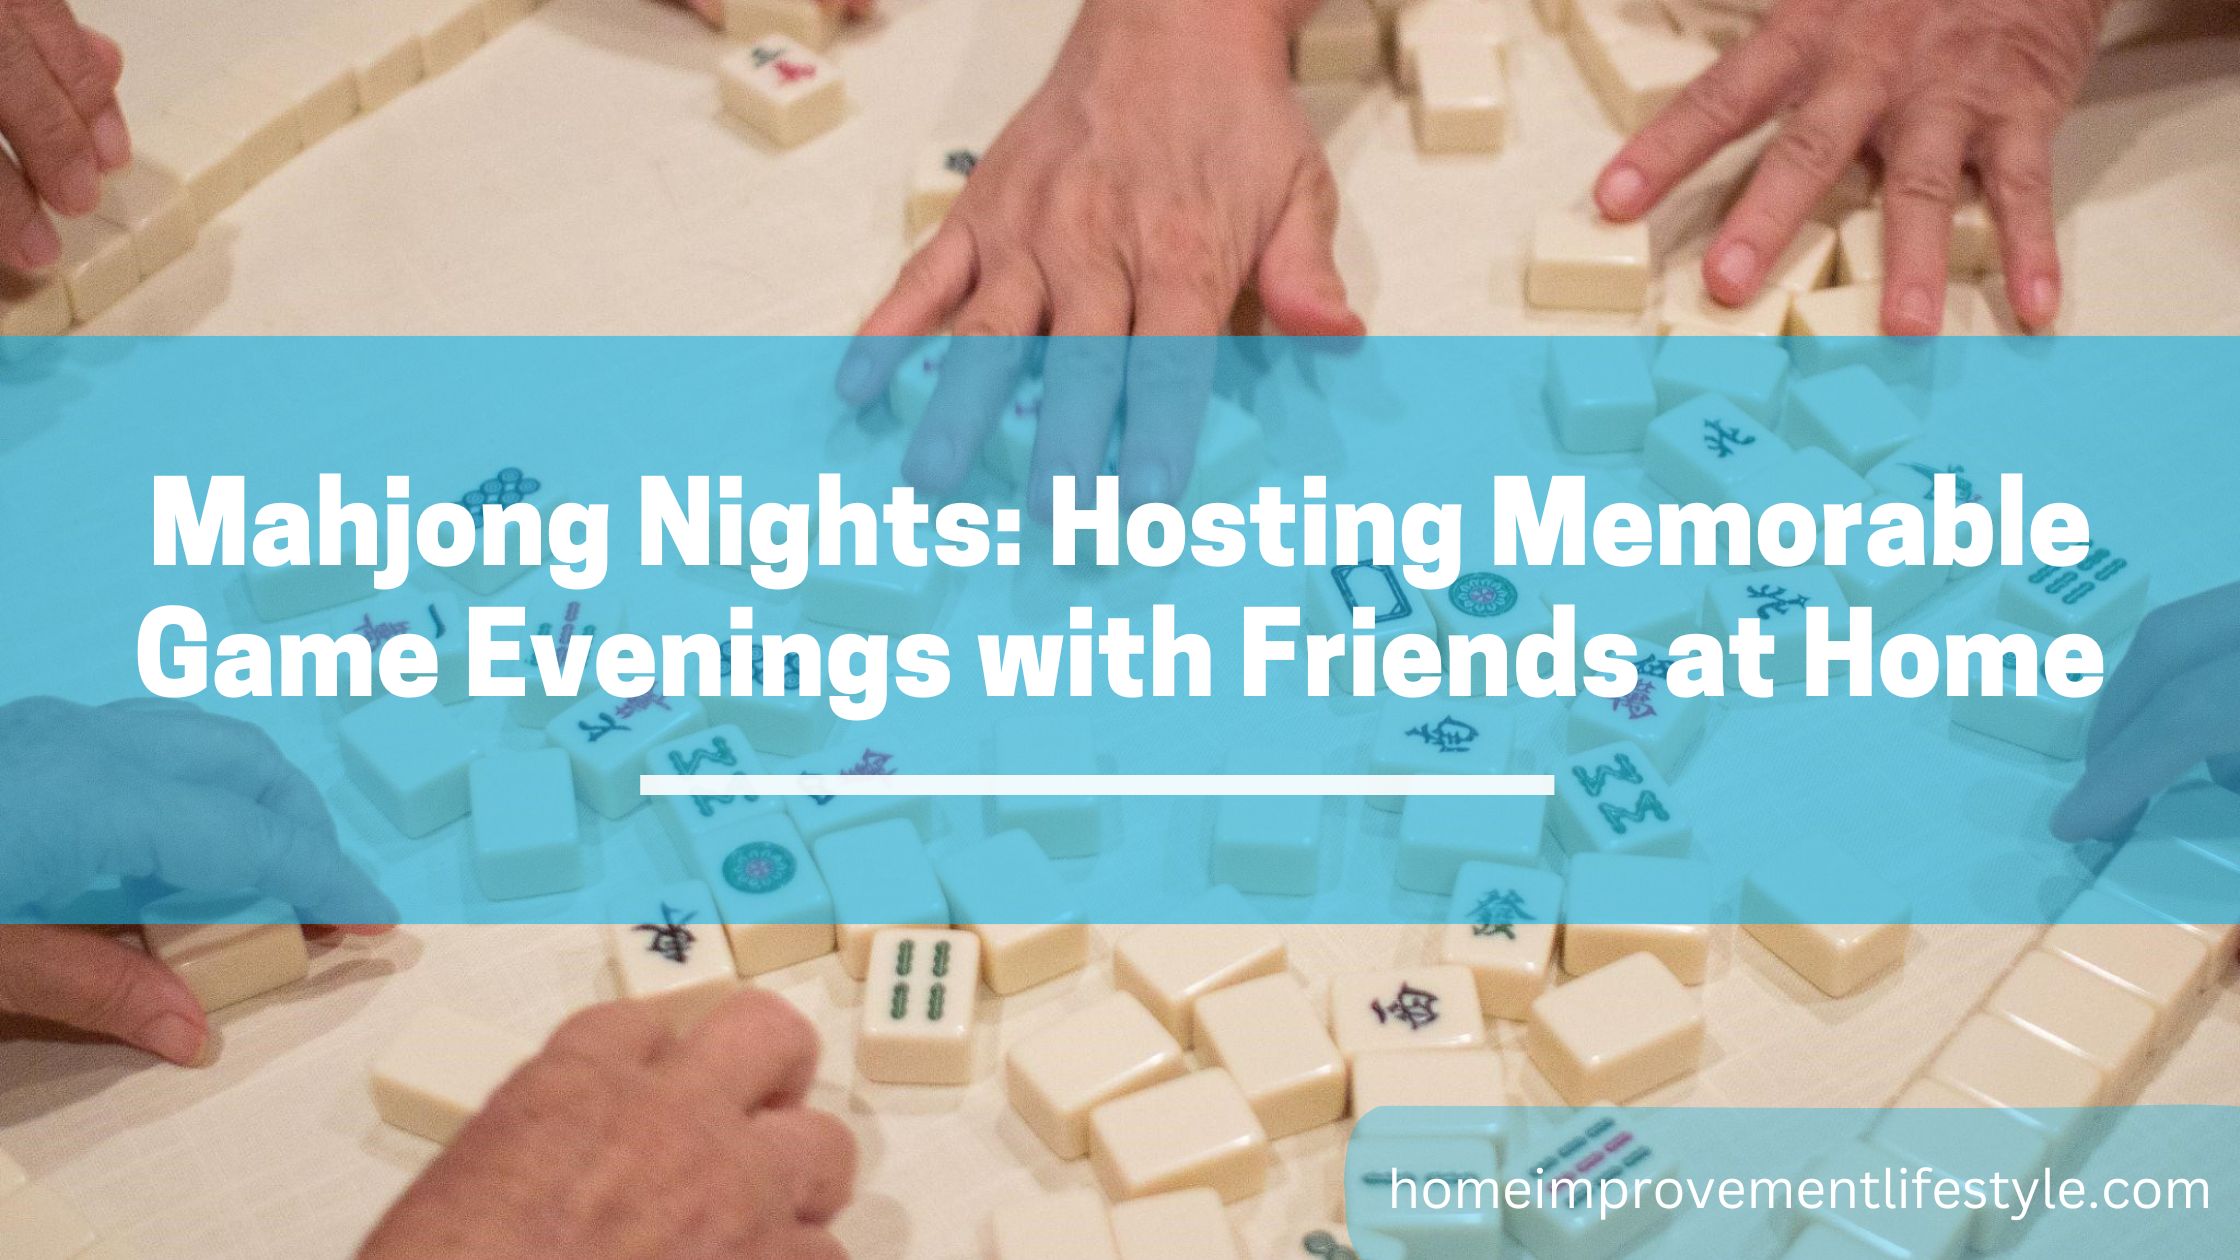 Mahjong Nights: Hosting Memorable Game Evenings with Friends at Home